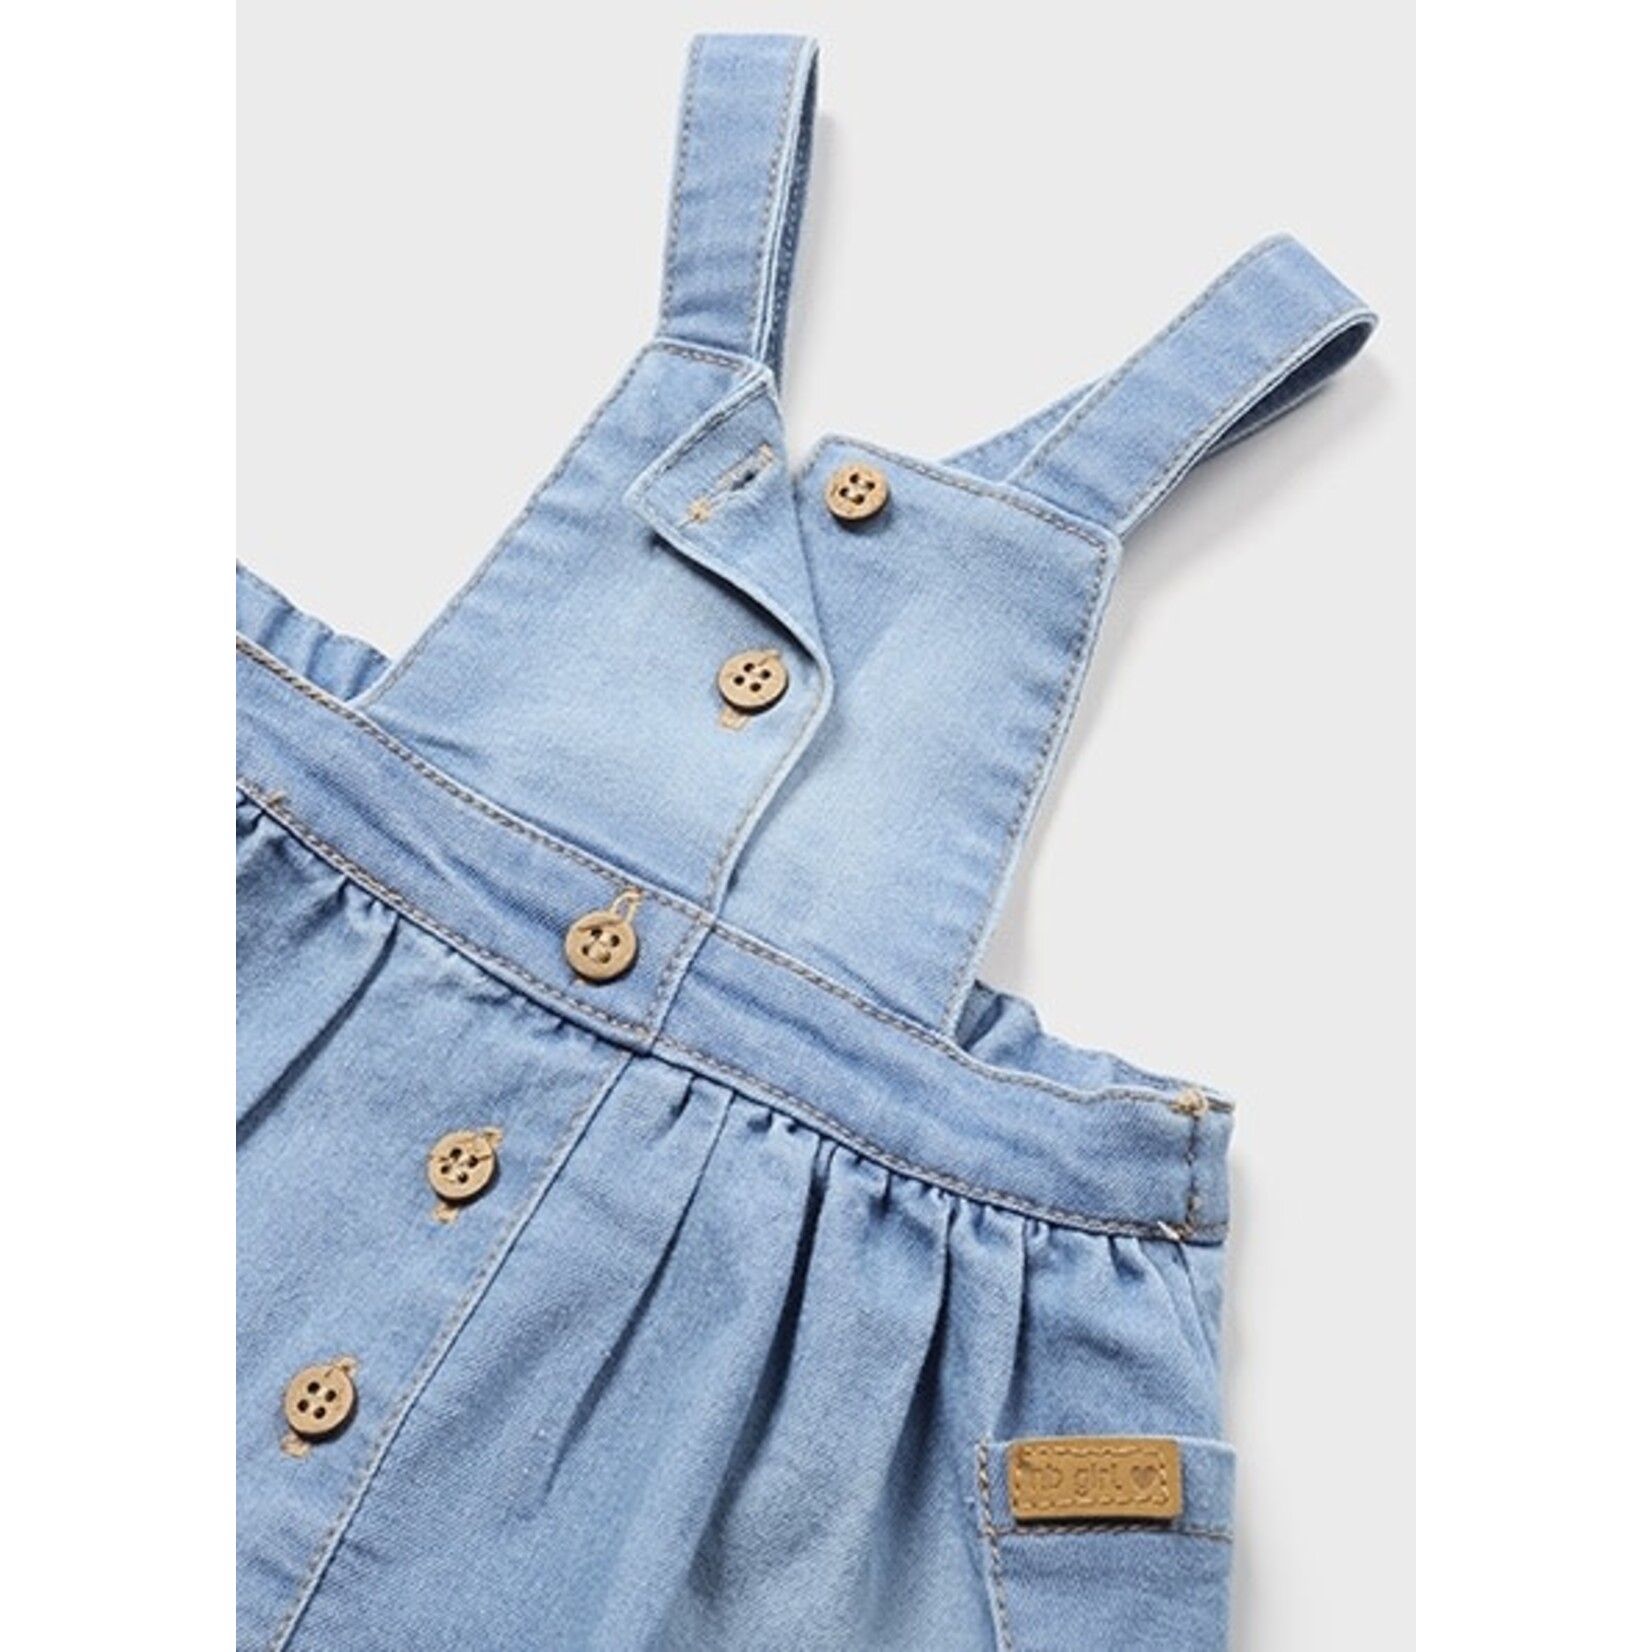 Baby Kids Denim Dresses For Girls Clothes Autumn School Shrit & Dress  Elegant Outfits Teenagers Children Costumes 8 10 12 Years - Girls Casual  Dresses - AliExpress